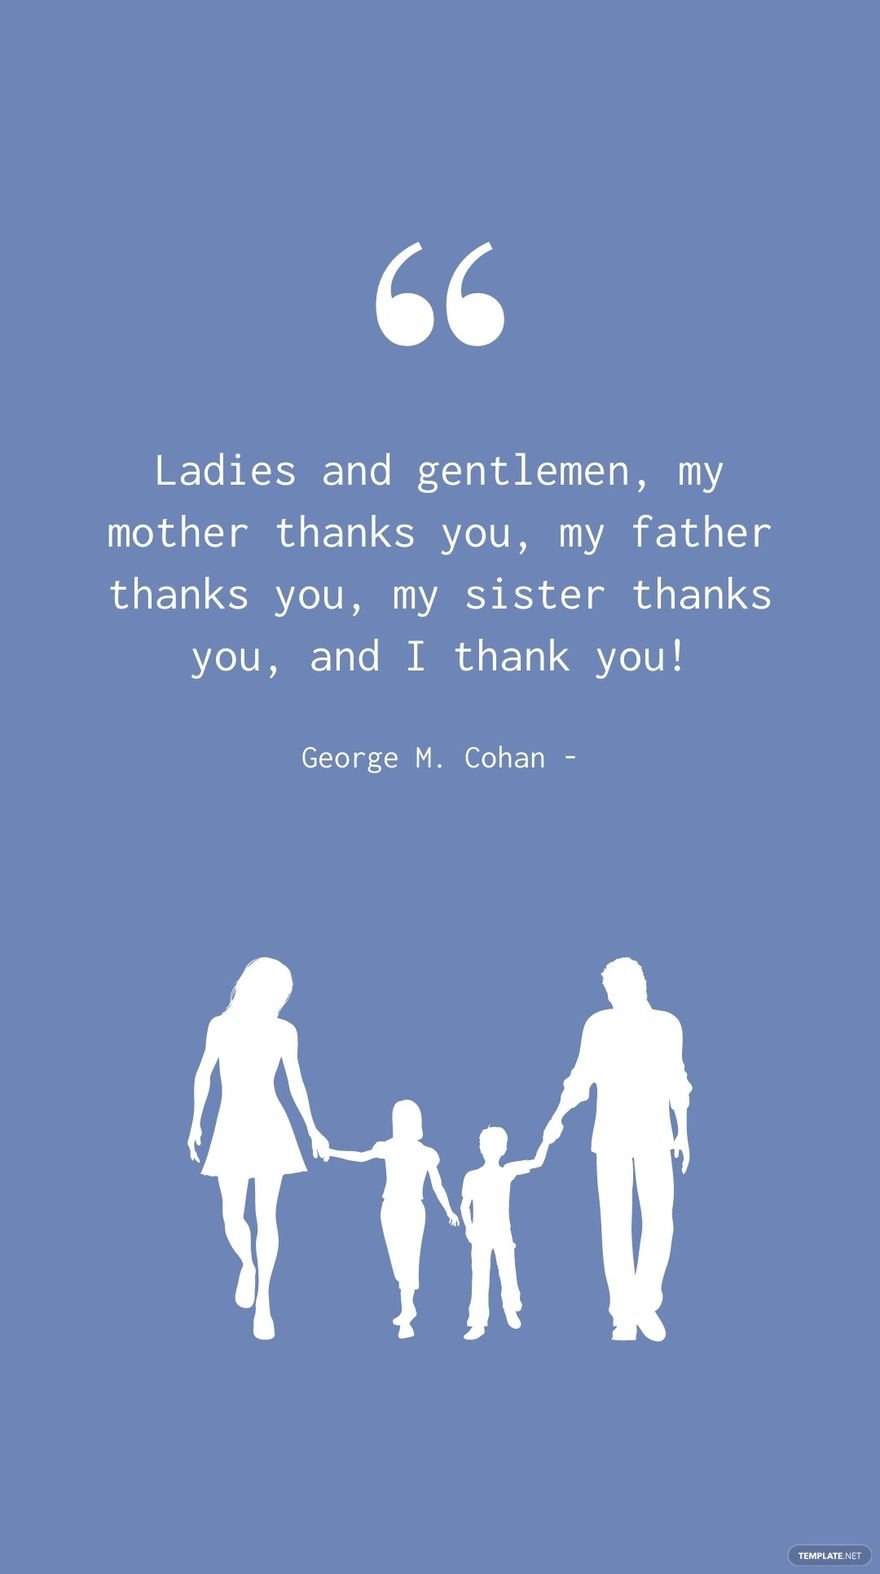 George M. Cohan - Ladies and gentlemen, my mother thanks you, my father thanks you, my sister thanks you, and I thank you!